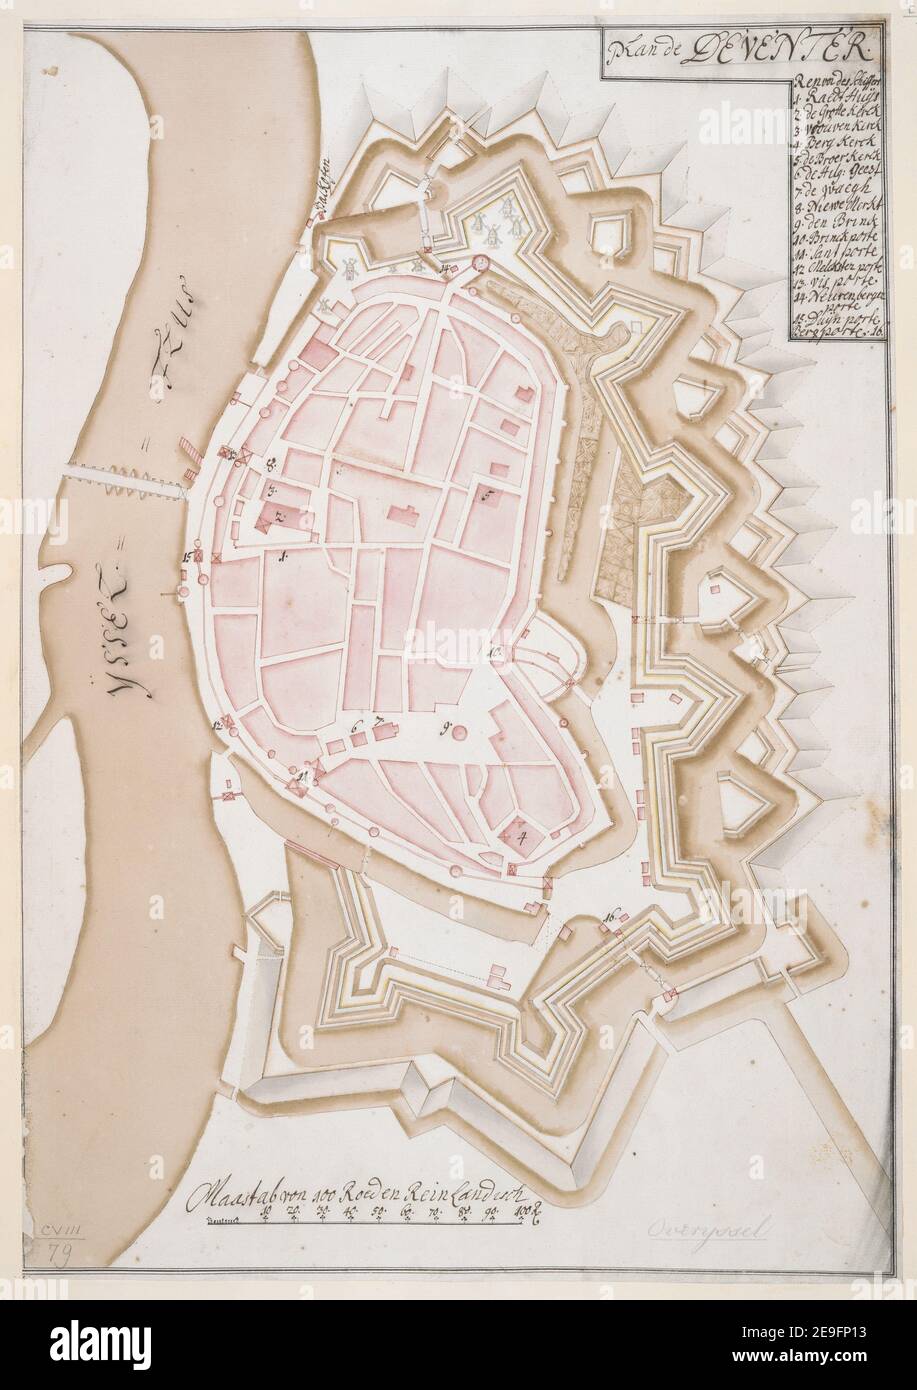 Plan de DEVENTER. Map information:  Title: Plan de DEVENTER. 108.79. Date of publication: ca. 1700-1720.  Item type: 1 map Medium: pen and ink with coloured wash Dimensions: 49.7 x 34.2 cm  Former owner: George III, King of Great Britain, 1738-1820 Stock Photo